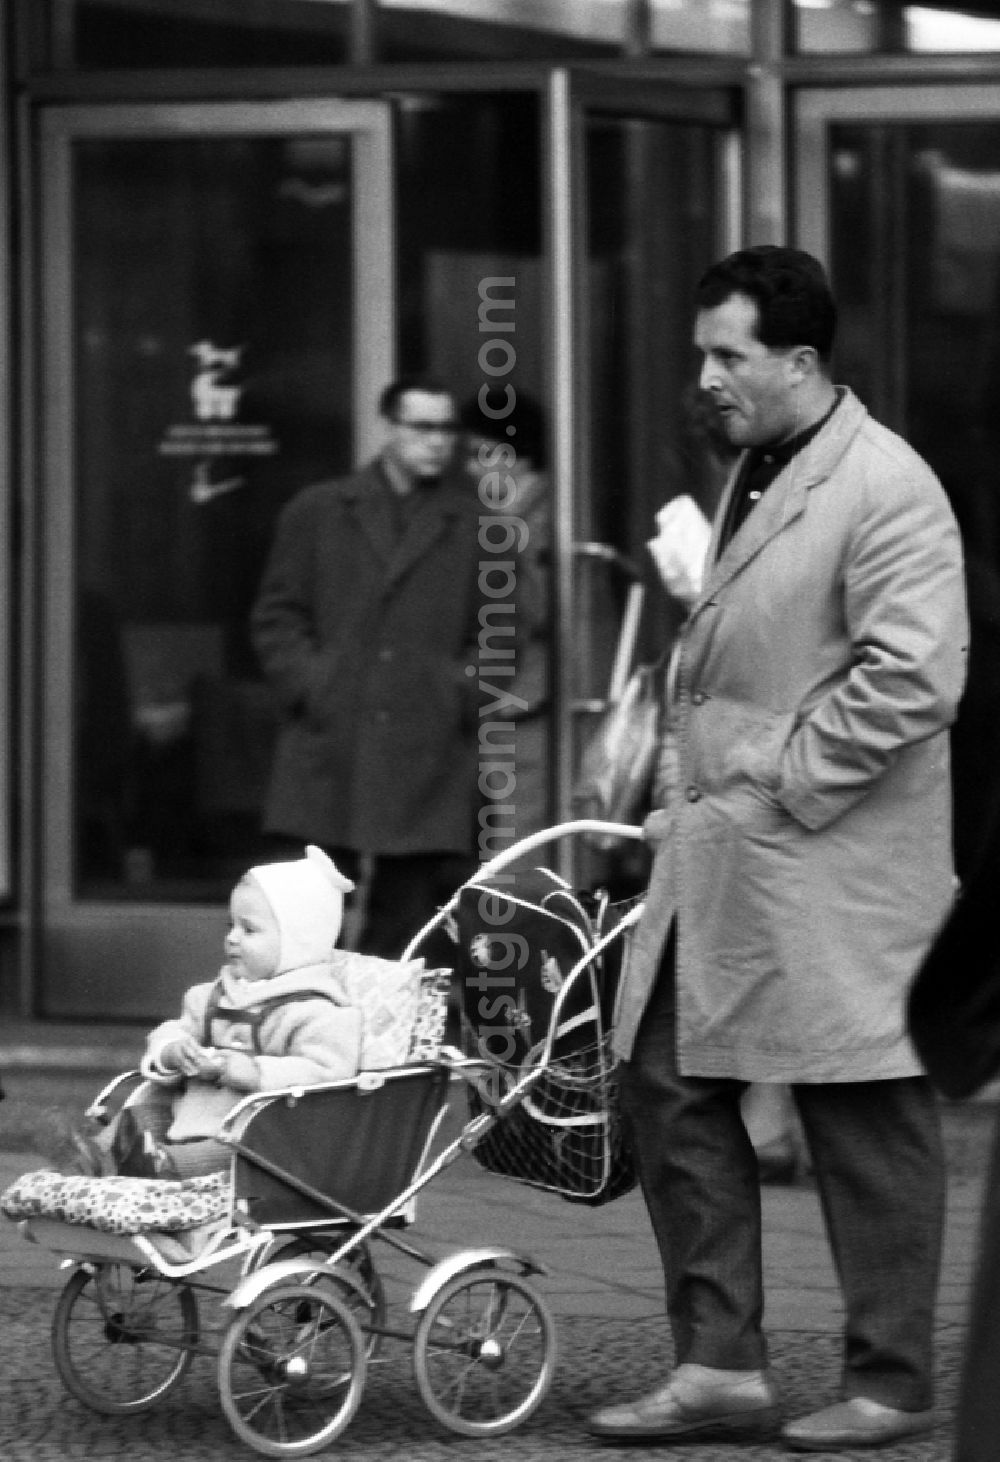 GDR image archive: Berlin - Father pushes his child in a stroller in East Berlin in the territory of the former GDR, German Democratic Republic